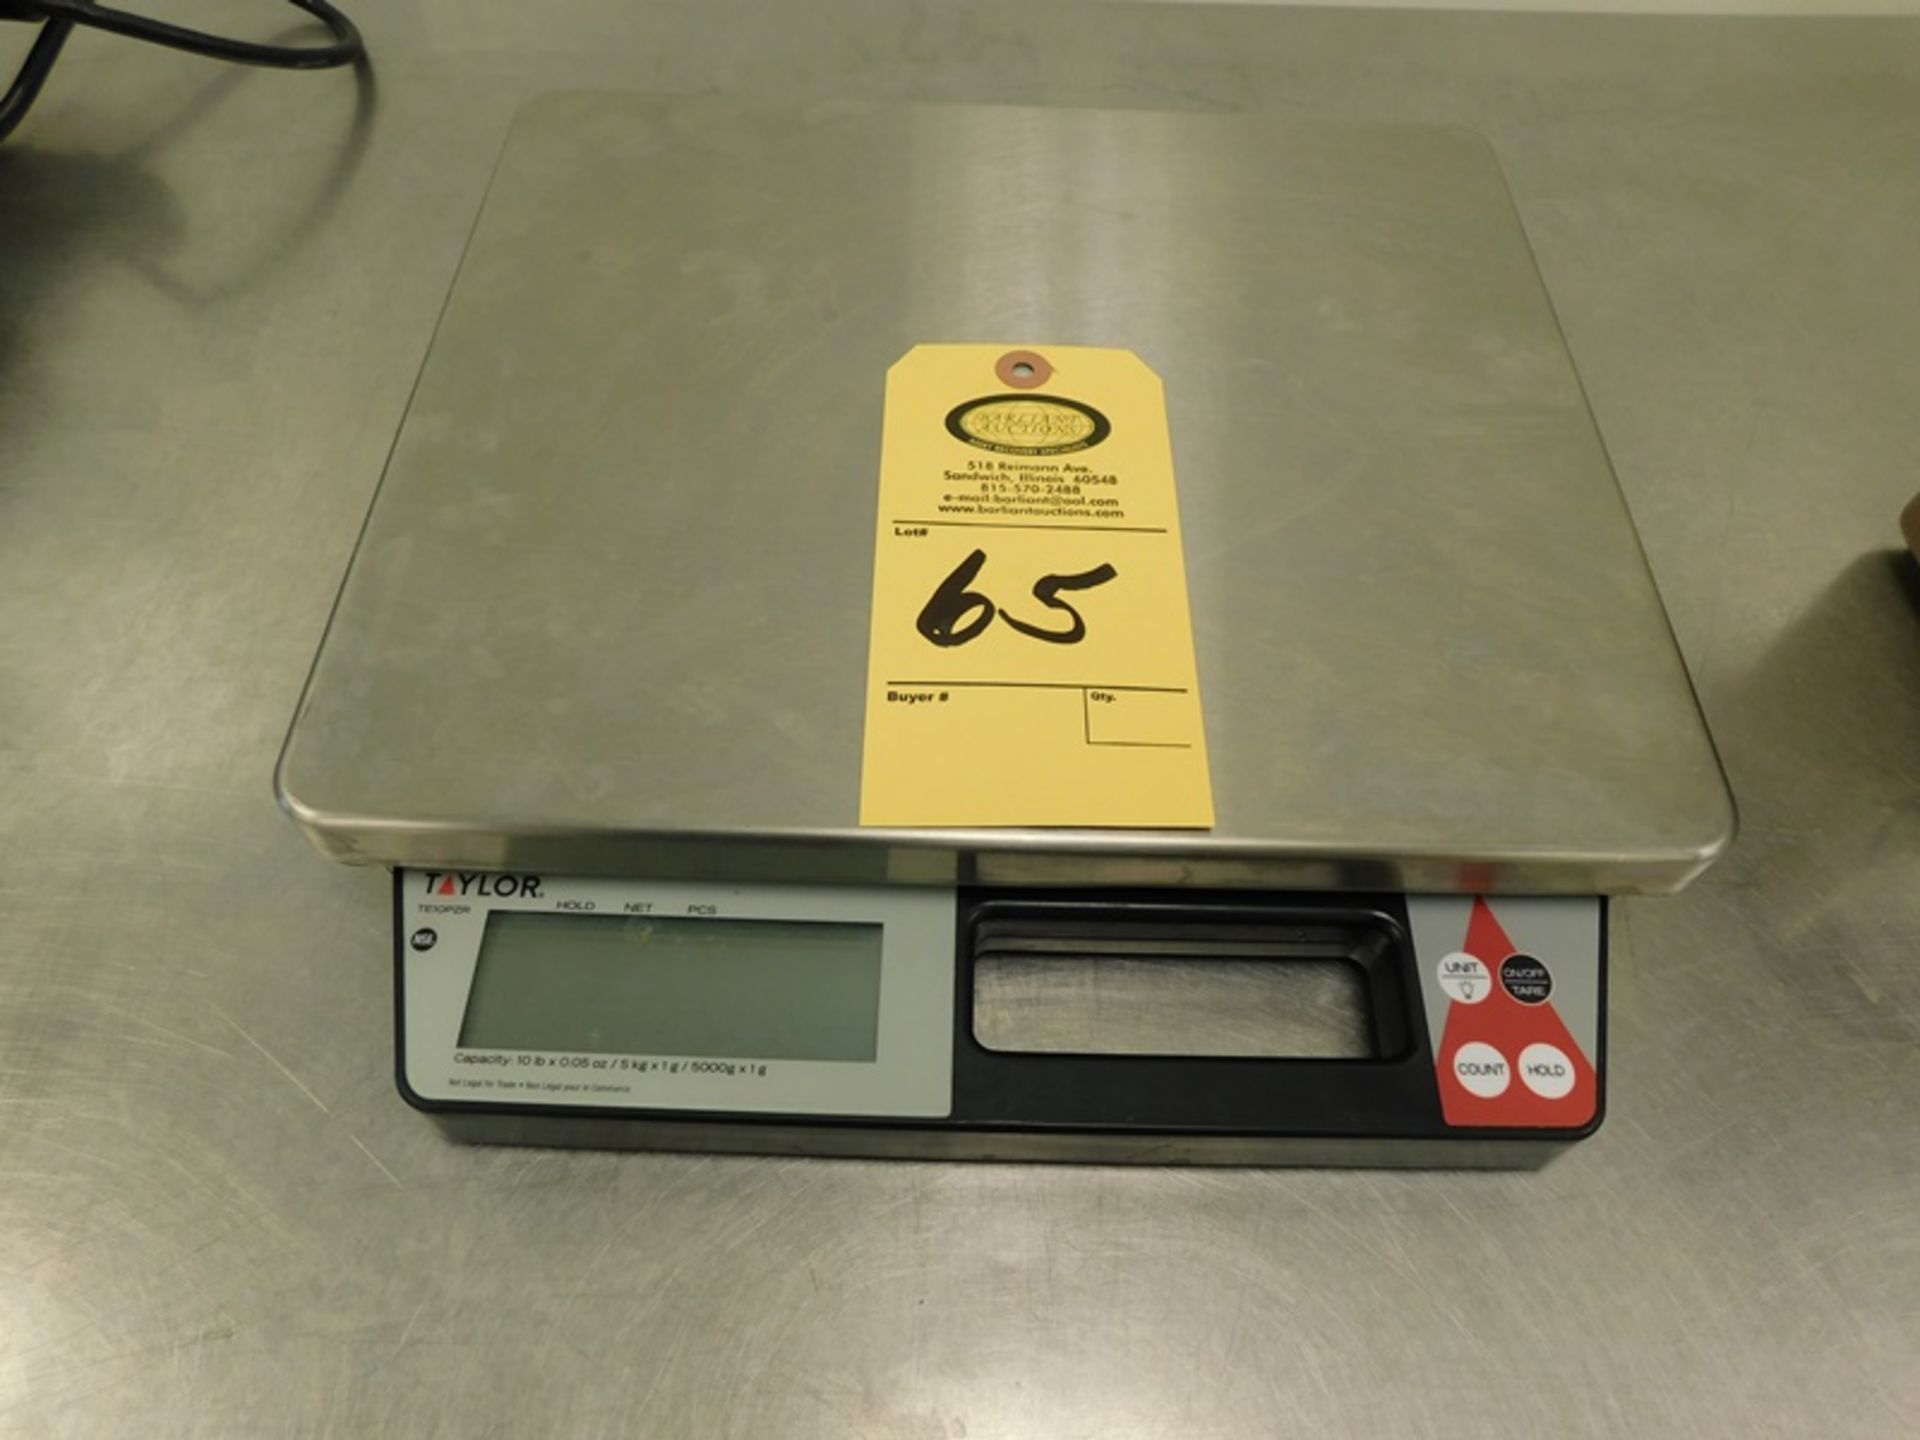 Taylor Mdl. TE10PZR Scale, rechargeable, 13 1/2" X 11 1/2", 10 lbs. capacity, DC 15 V, no charging